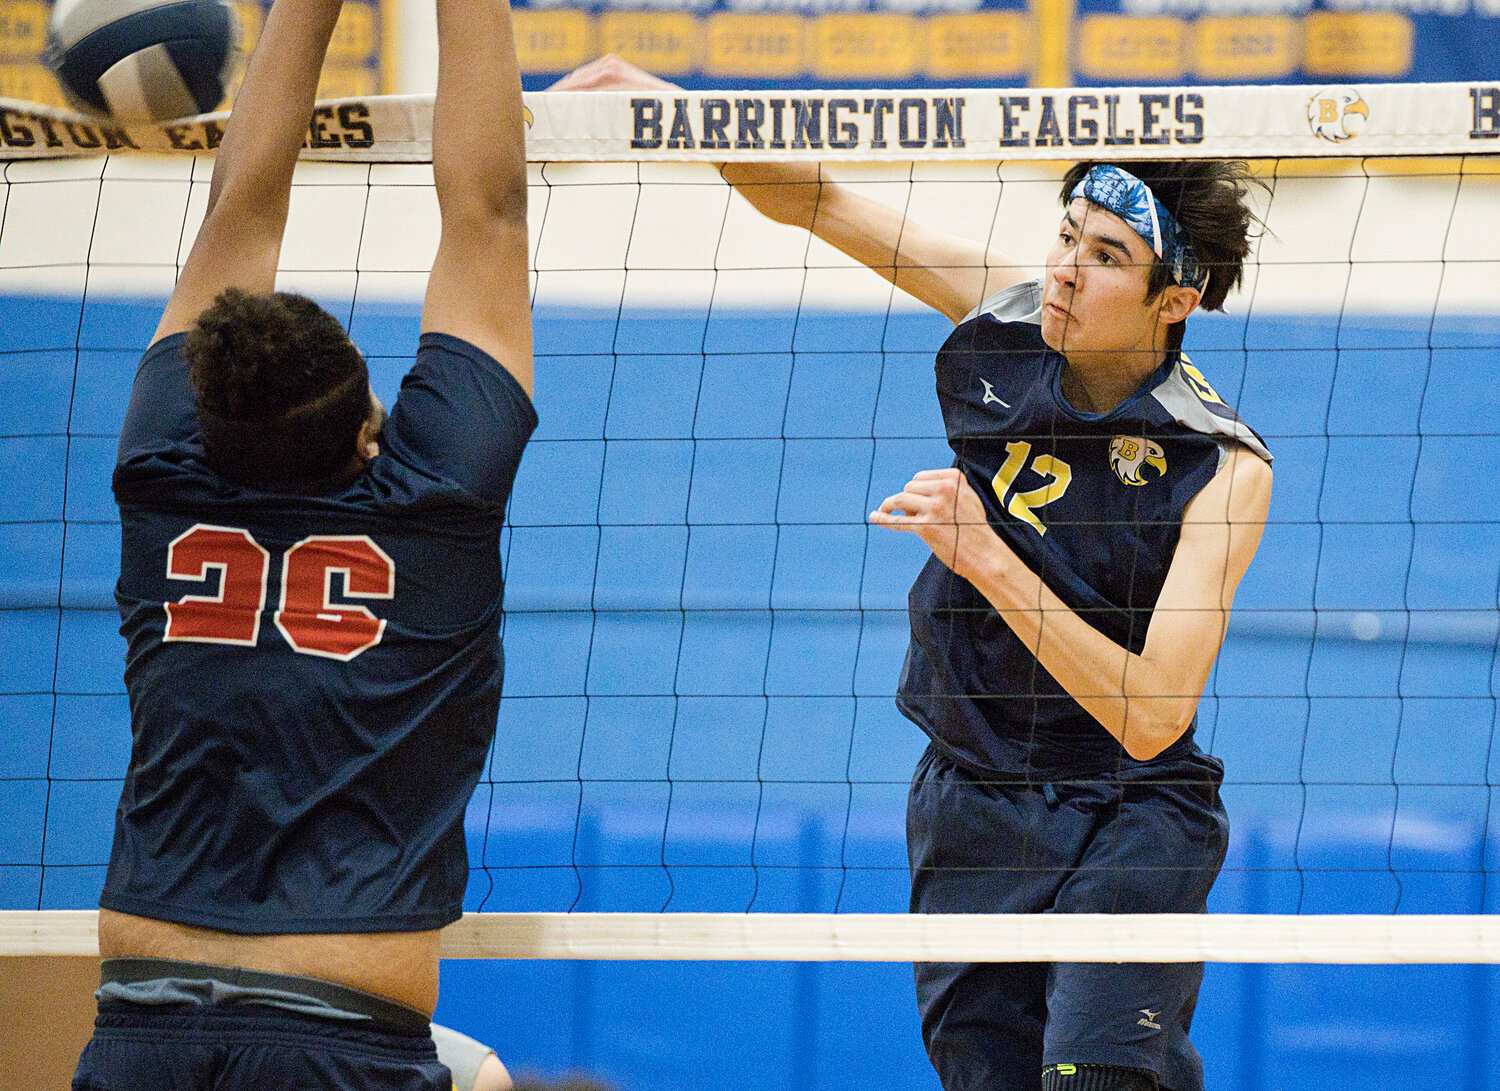 Maddox Godwin, shown earlier this season, had 17 kills and 13 digs in the Eagles' win over Cranston West.